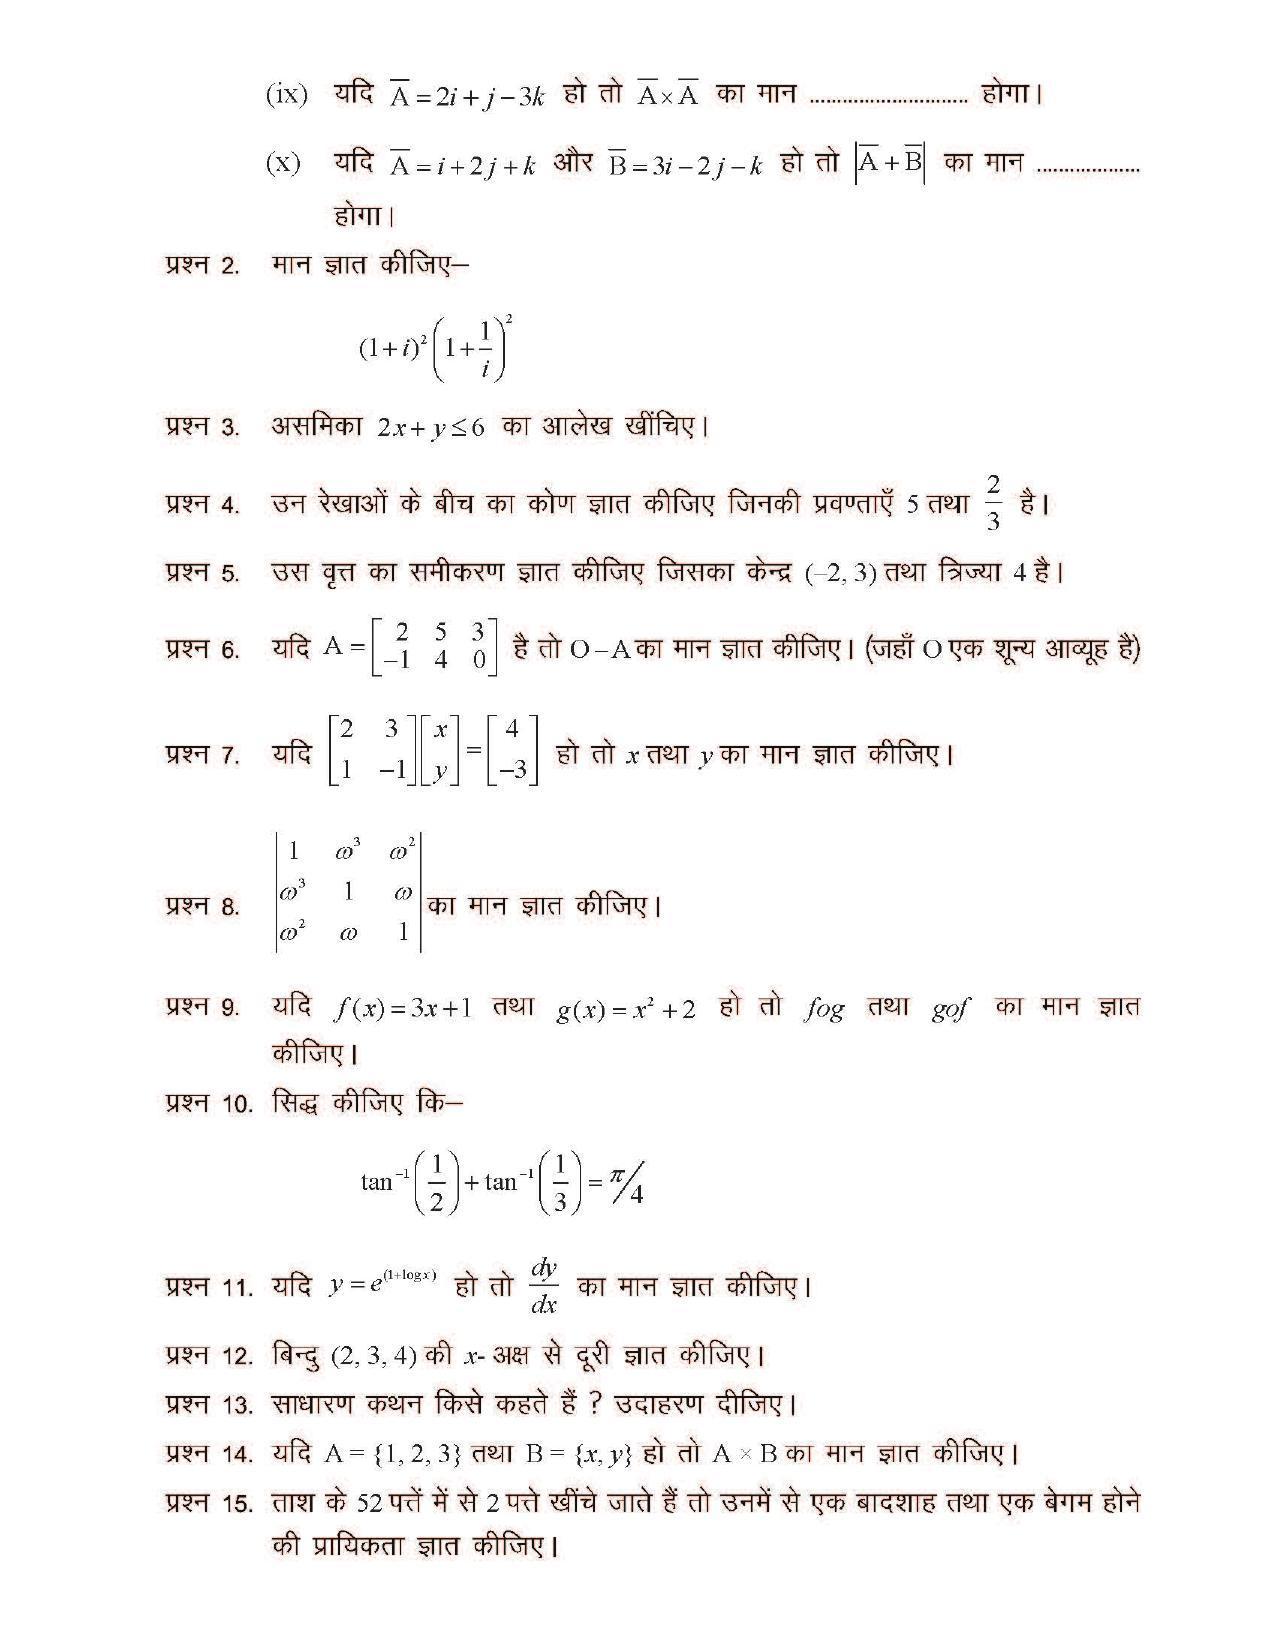 CGSOS Class 12 Model Question Paper - Maths - II - Page 3